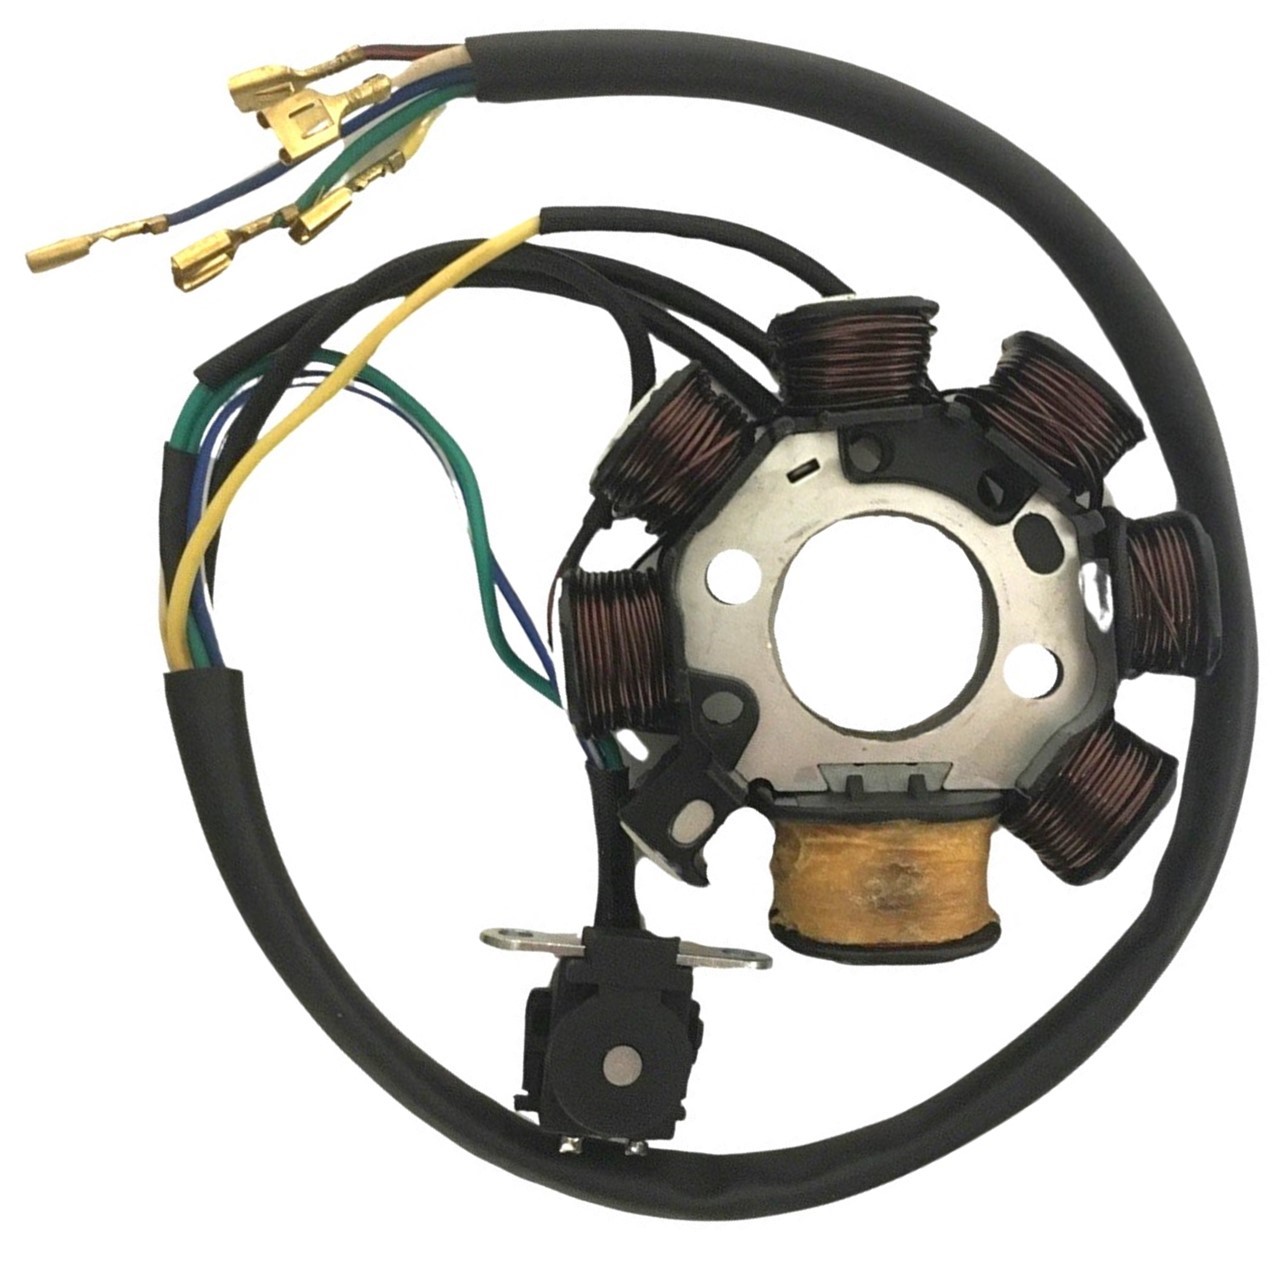 STATOR 90-125cc Fits many Chinese ATVs, Dirt Bikes 8 Pole - 7 Coils + 1 Open 5 Wires - No Jack OD=84 ID=29 H=26 Bolts c/c=40 - Click Image to Close